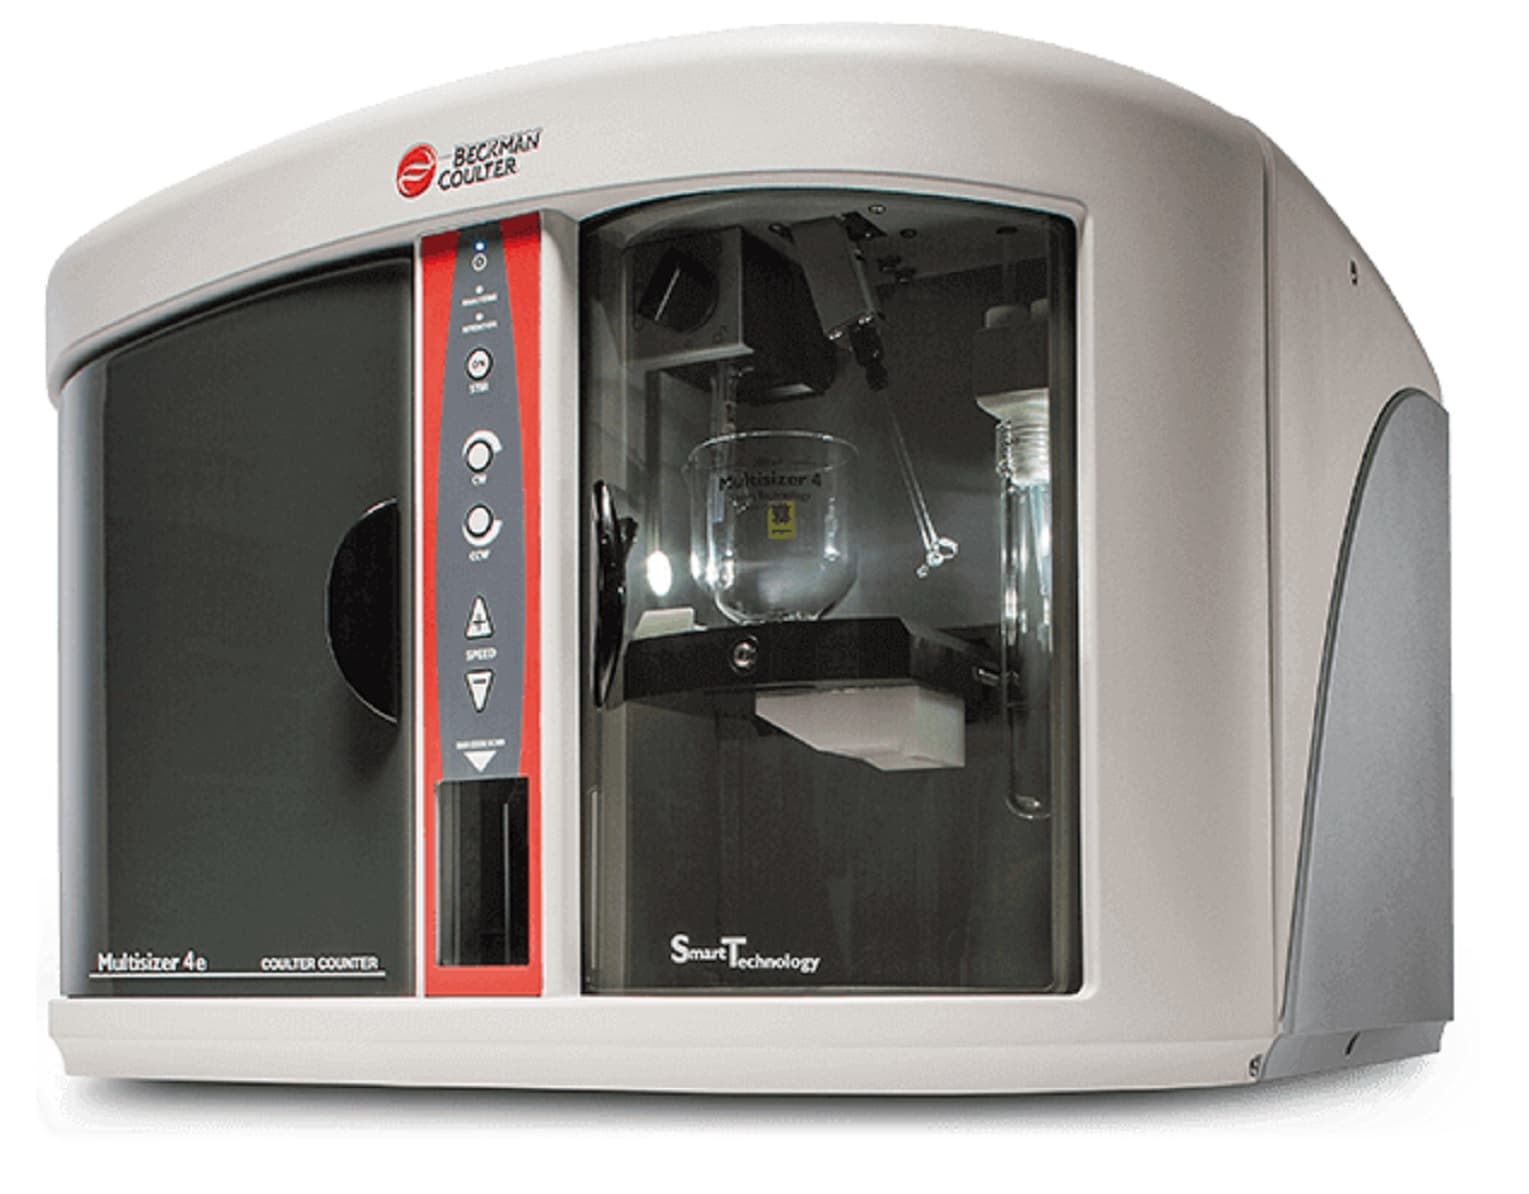 Monitoring Yeast Cultures with the BioLector XT and Multisizer 4e instruments